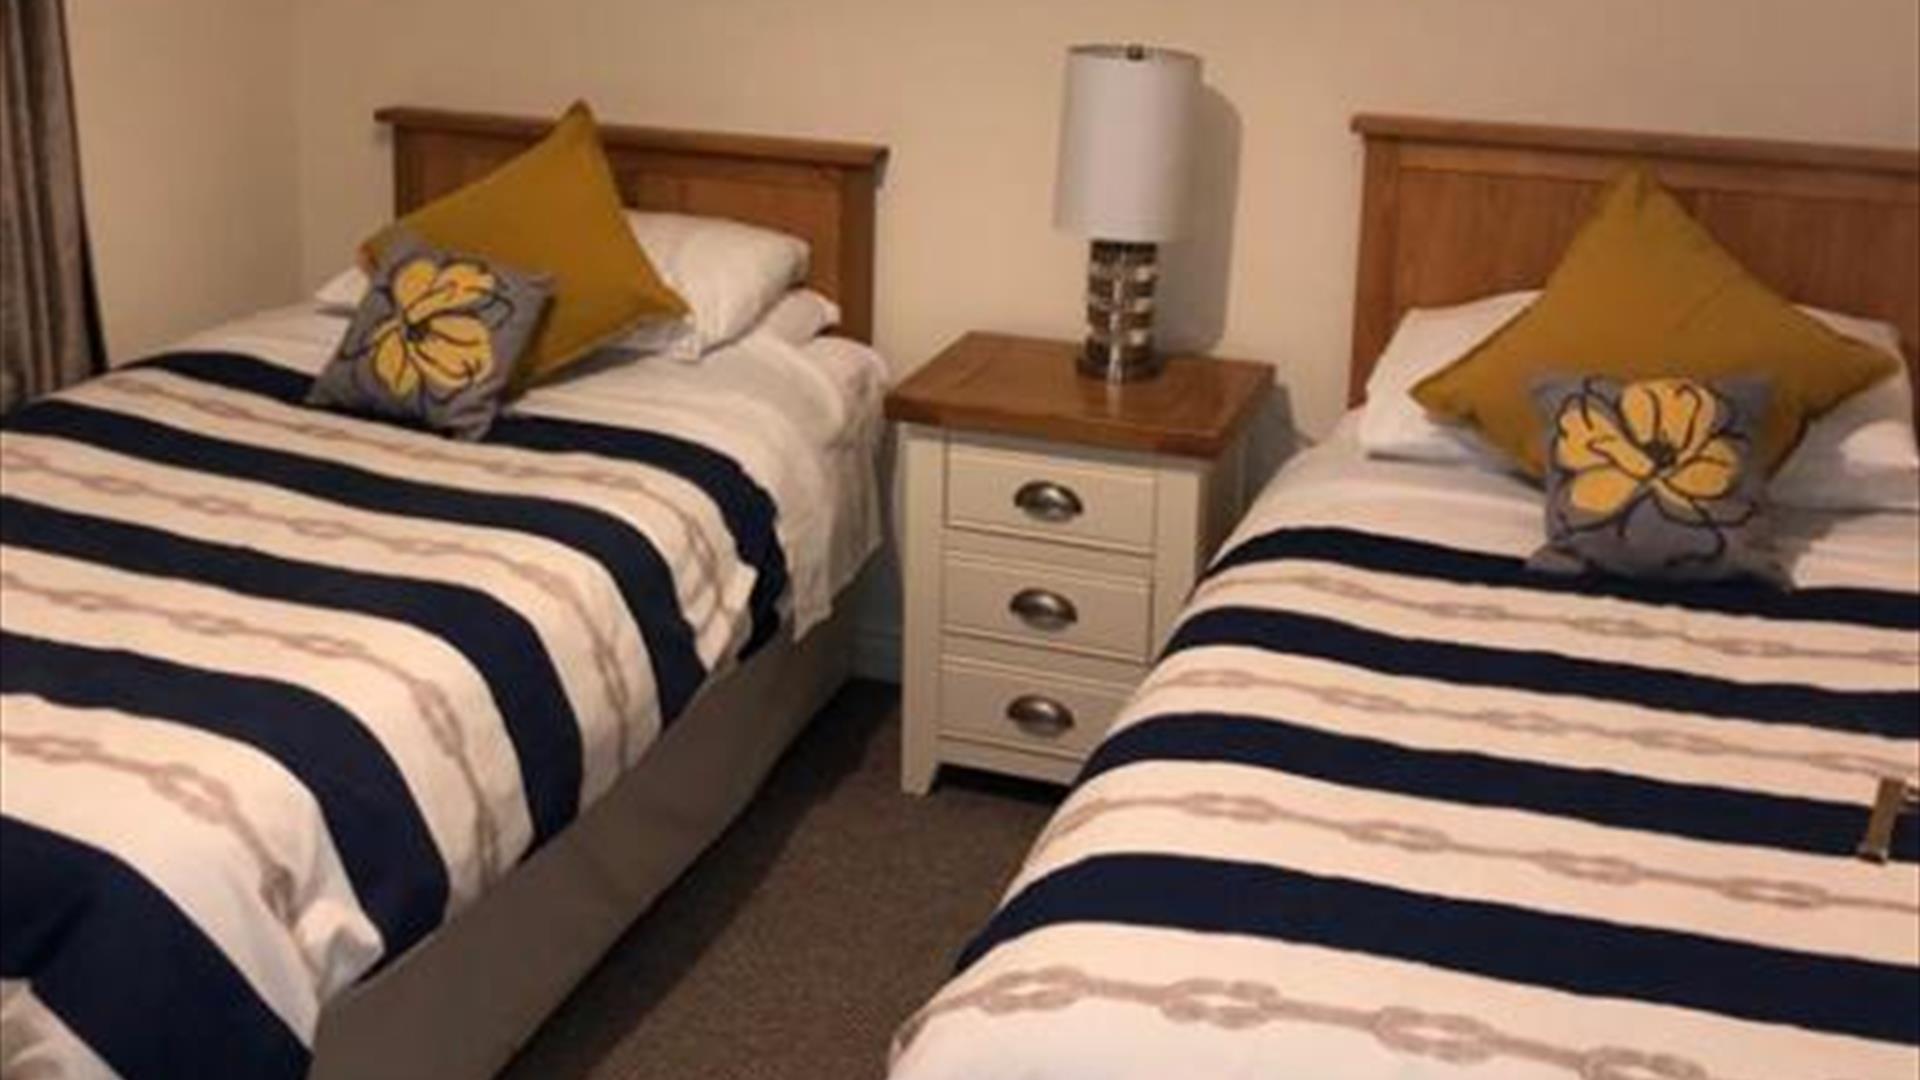 Image shows twin bedroom with bedside table and lamp between the beds
